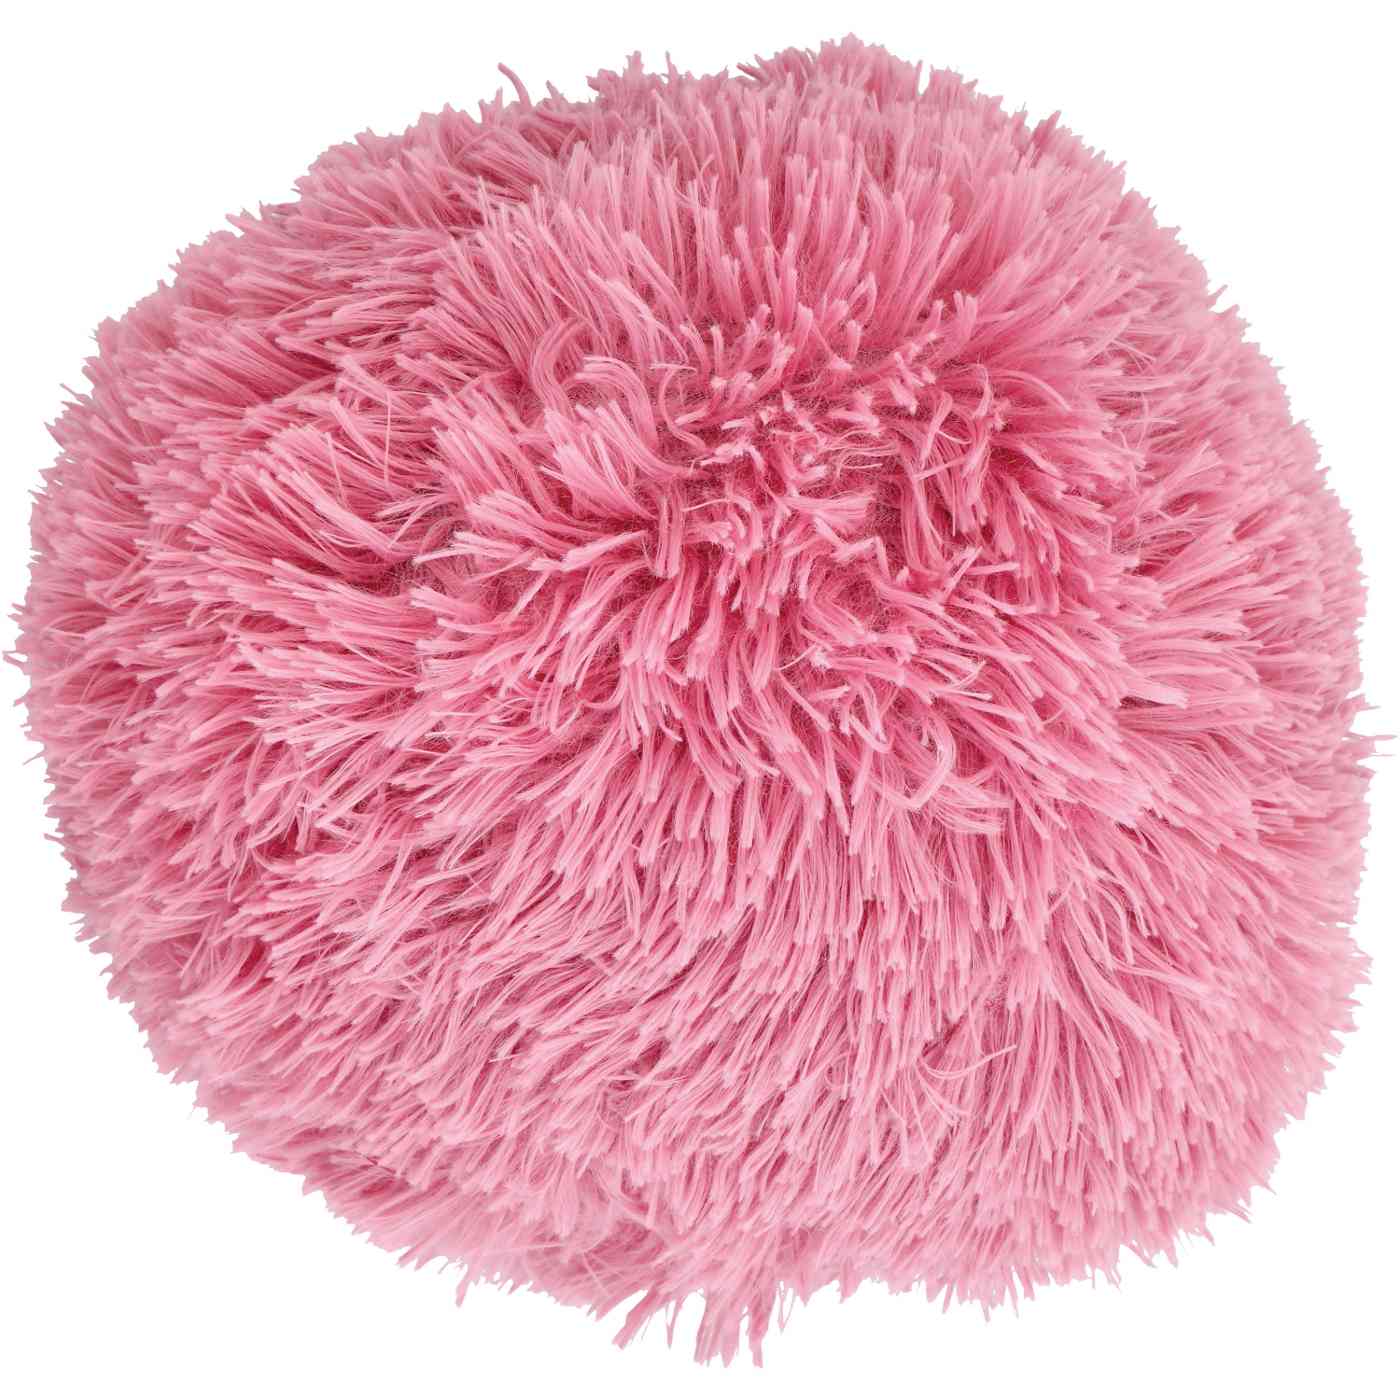 Destination Holiday Shaggy Round Pillow - Pink; image 1 of 2